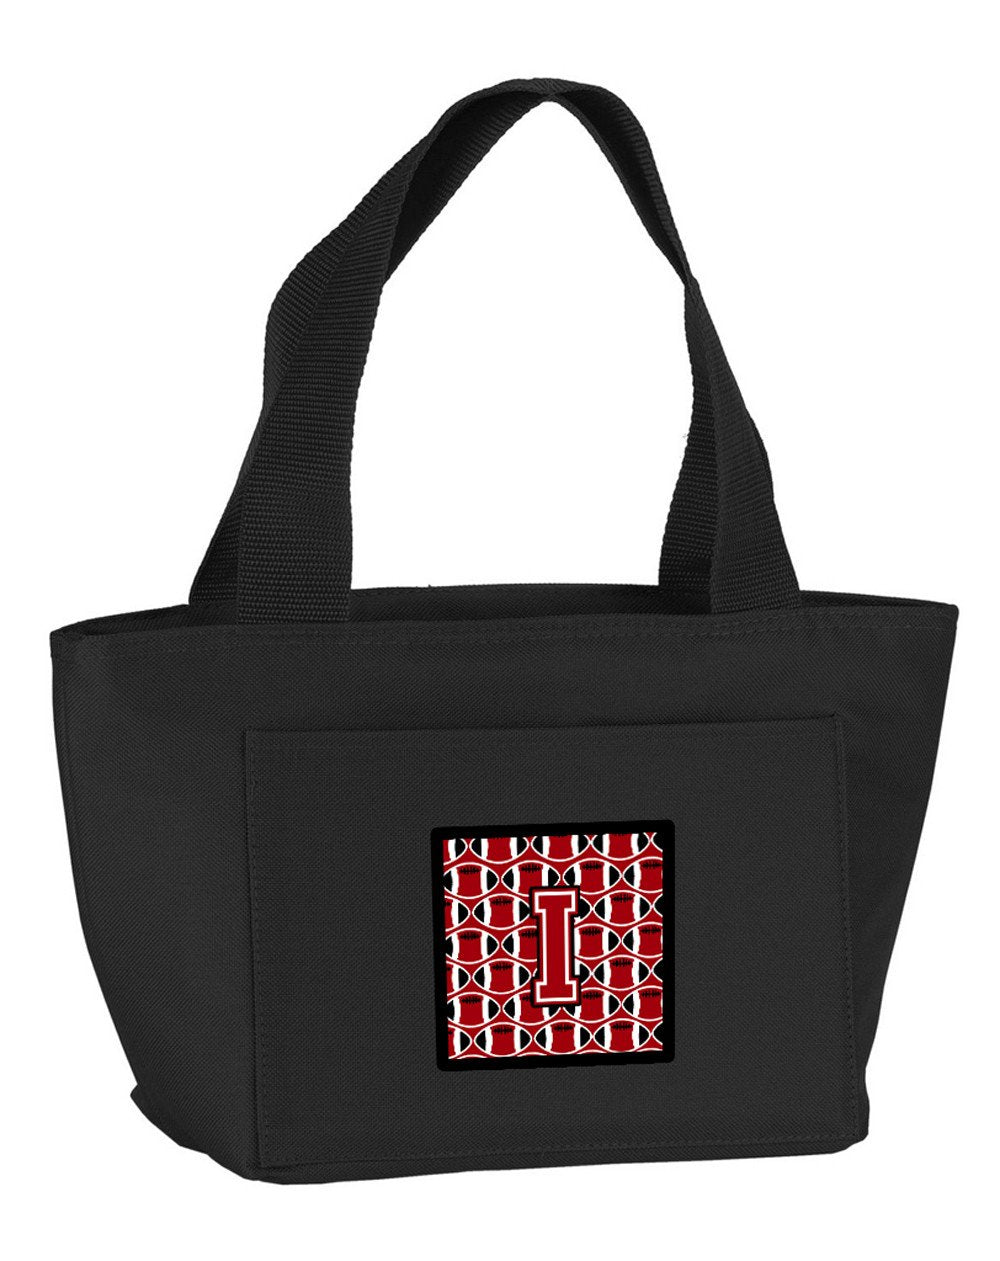 Letter I Football Red, Black and White Lunch Bag CJ1073-IBK-8808 by Caroline's Treasures